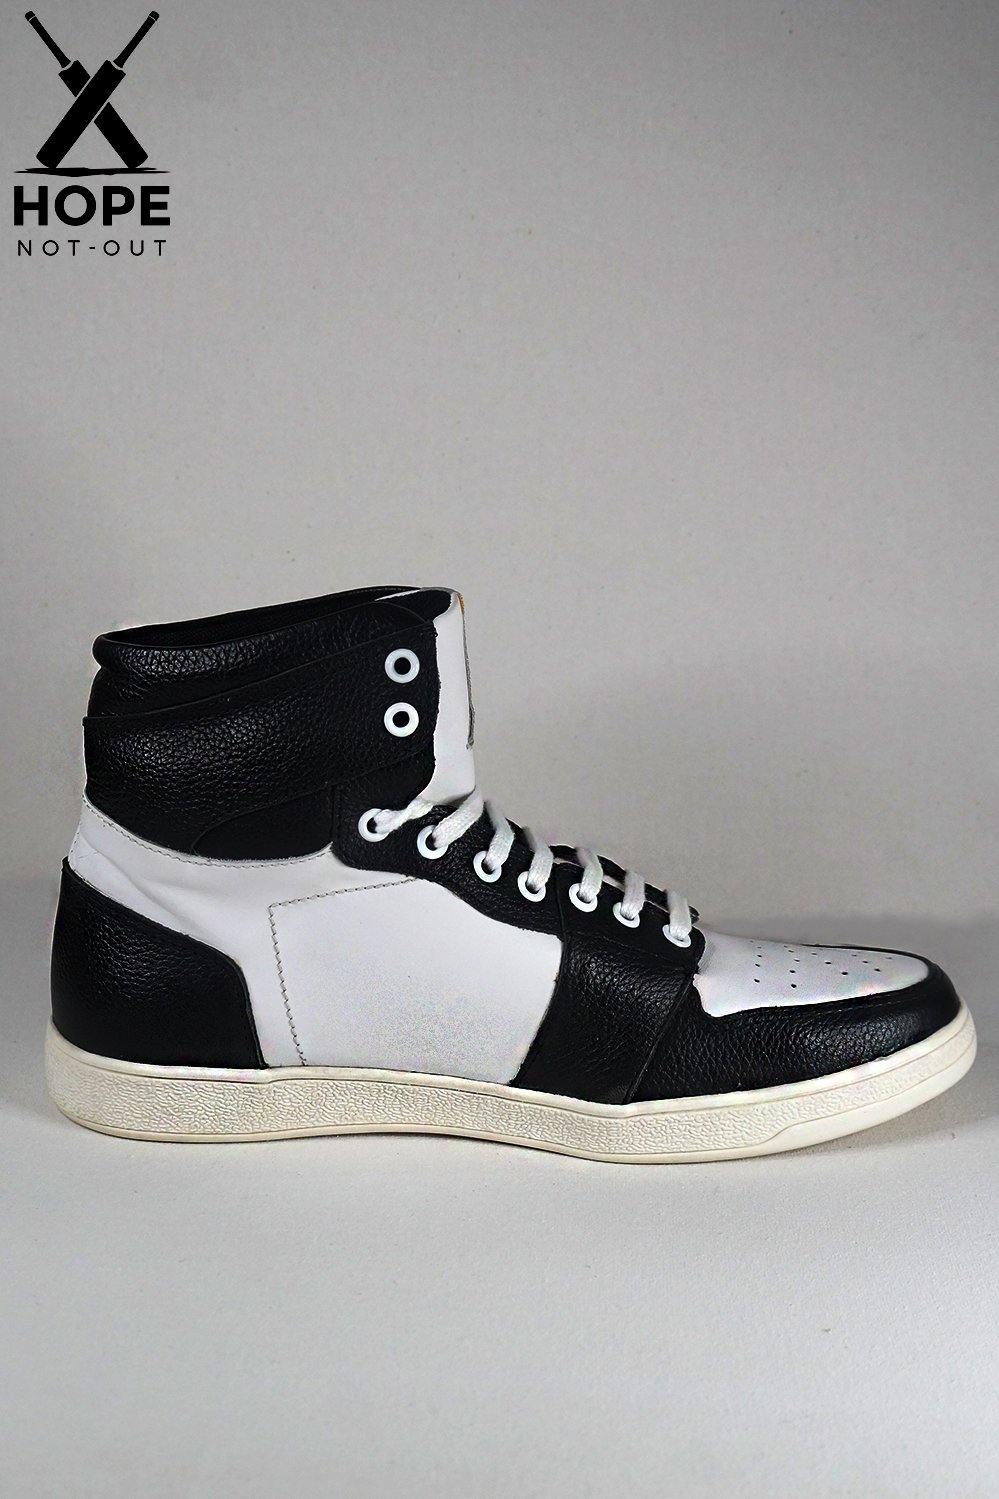 Hand Made Leather BLACK/WHITE Shoes HMSLF20009 - Shoes - HOPE NOT OUT